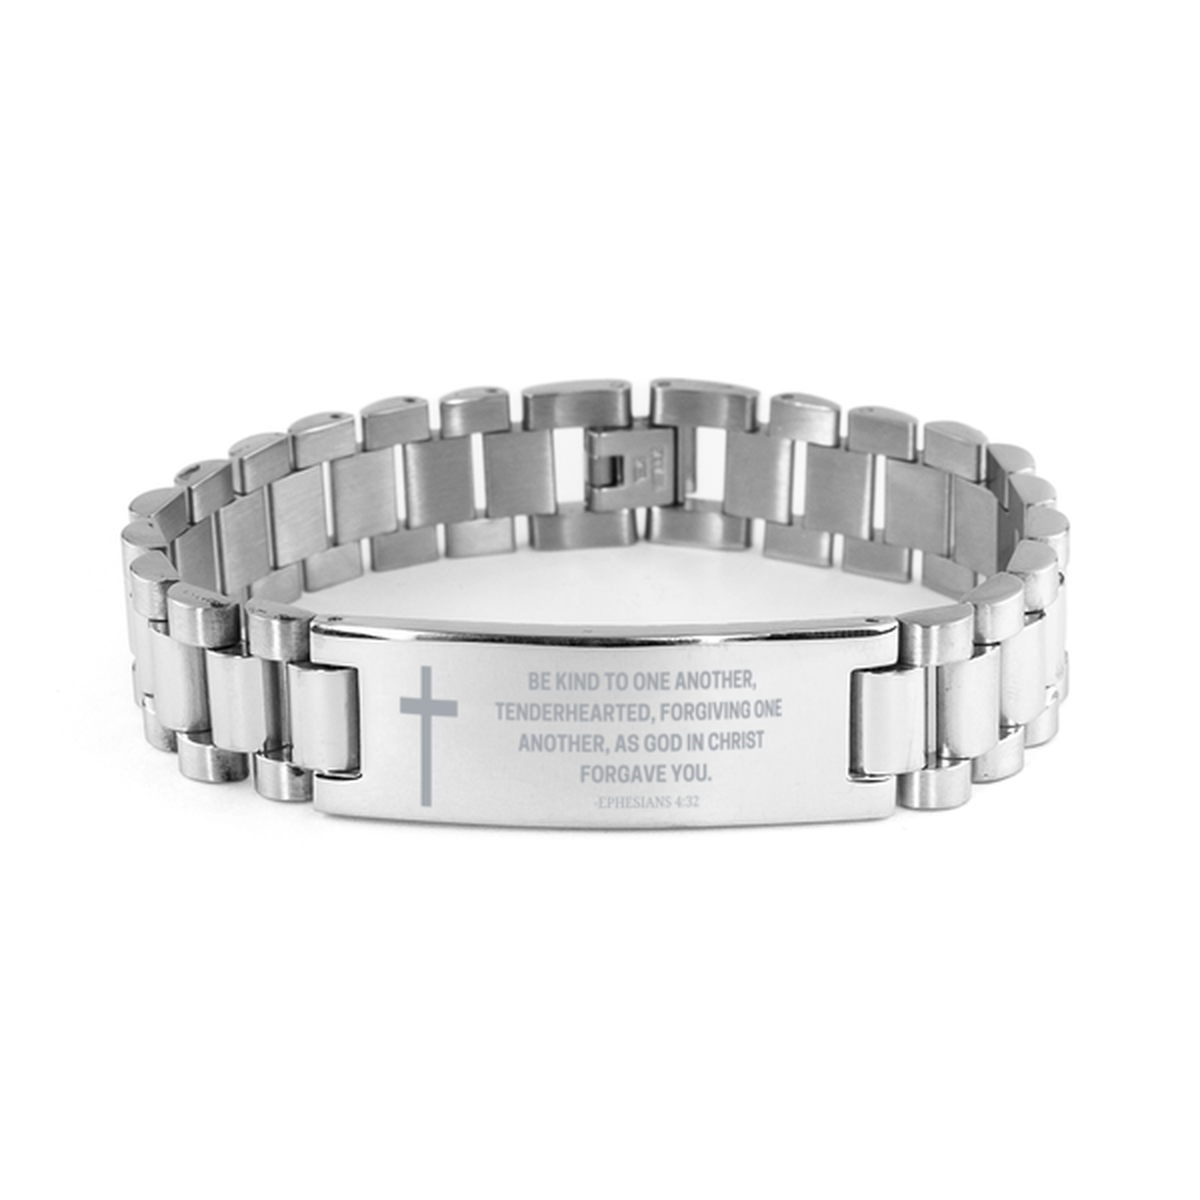 Baptism Gifts For Teenage Boys Girls, Christian Bible Verse Ladder Stainless Steel Bracelet, Be kind to one another, Catholic Confirmation Gifts for Son, Godson, Grandson, Nephew